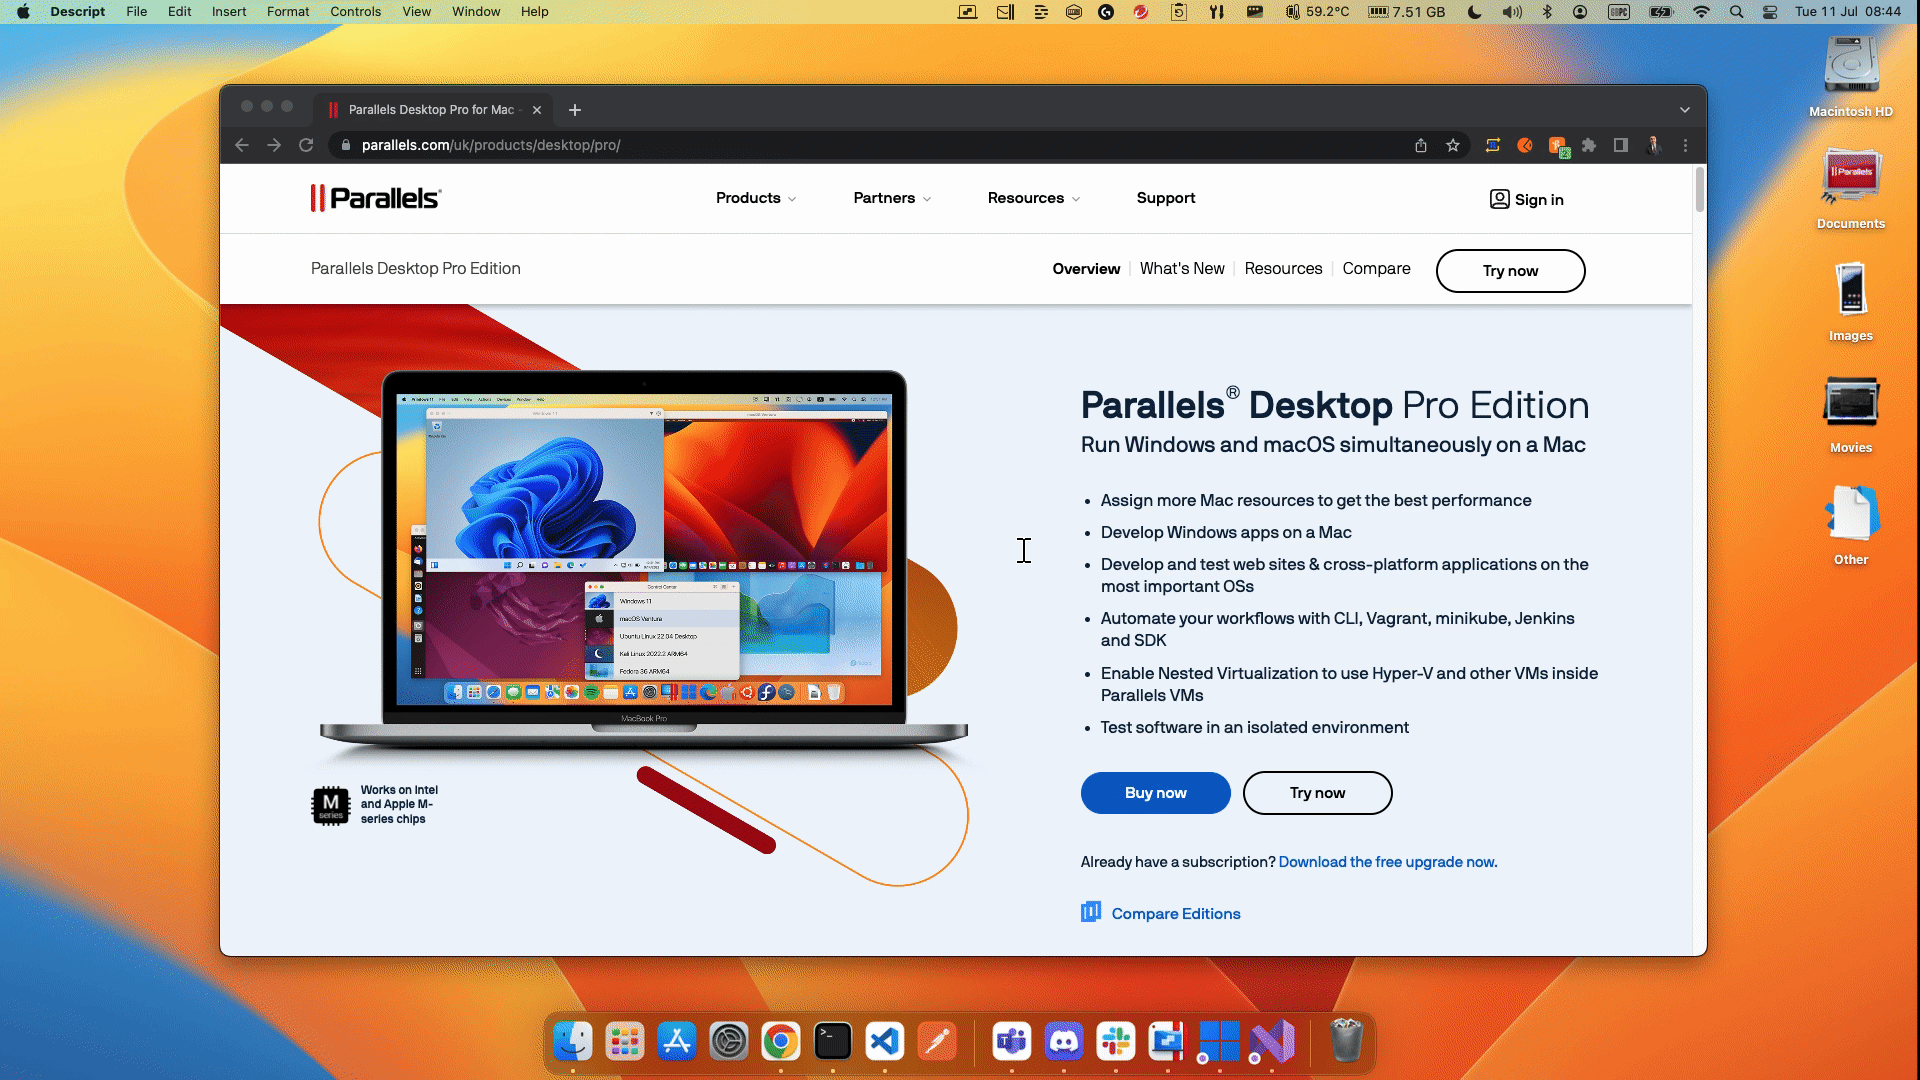 Run Windows in full-screen side by side with macOS to separate your personal and workspaces